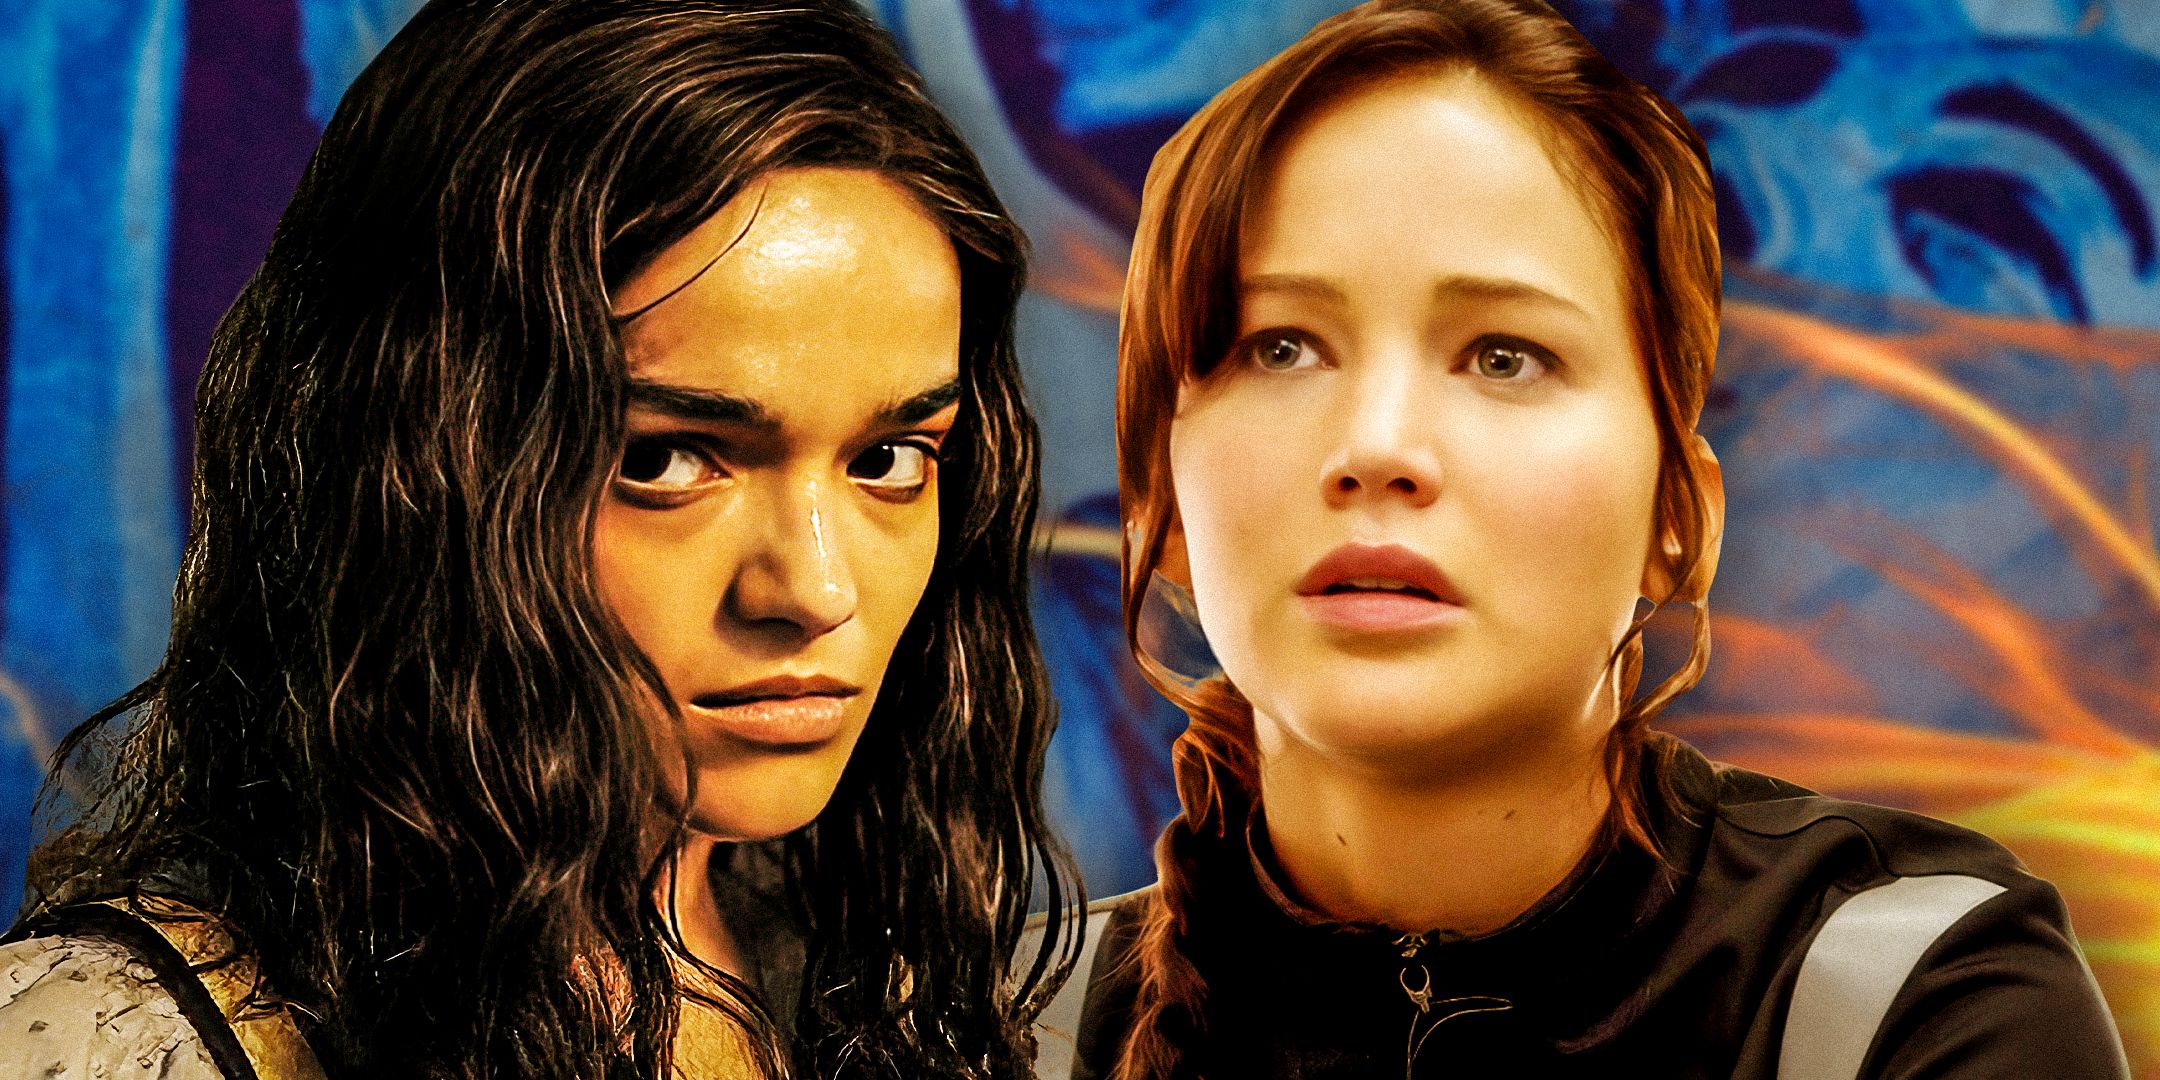 Lucy-Gray-and-Katniss-Everdeen-From-The-Hunger-Games-Franchise